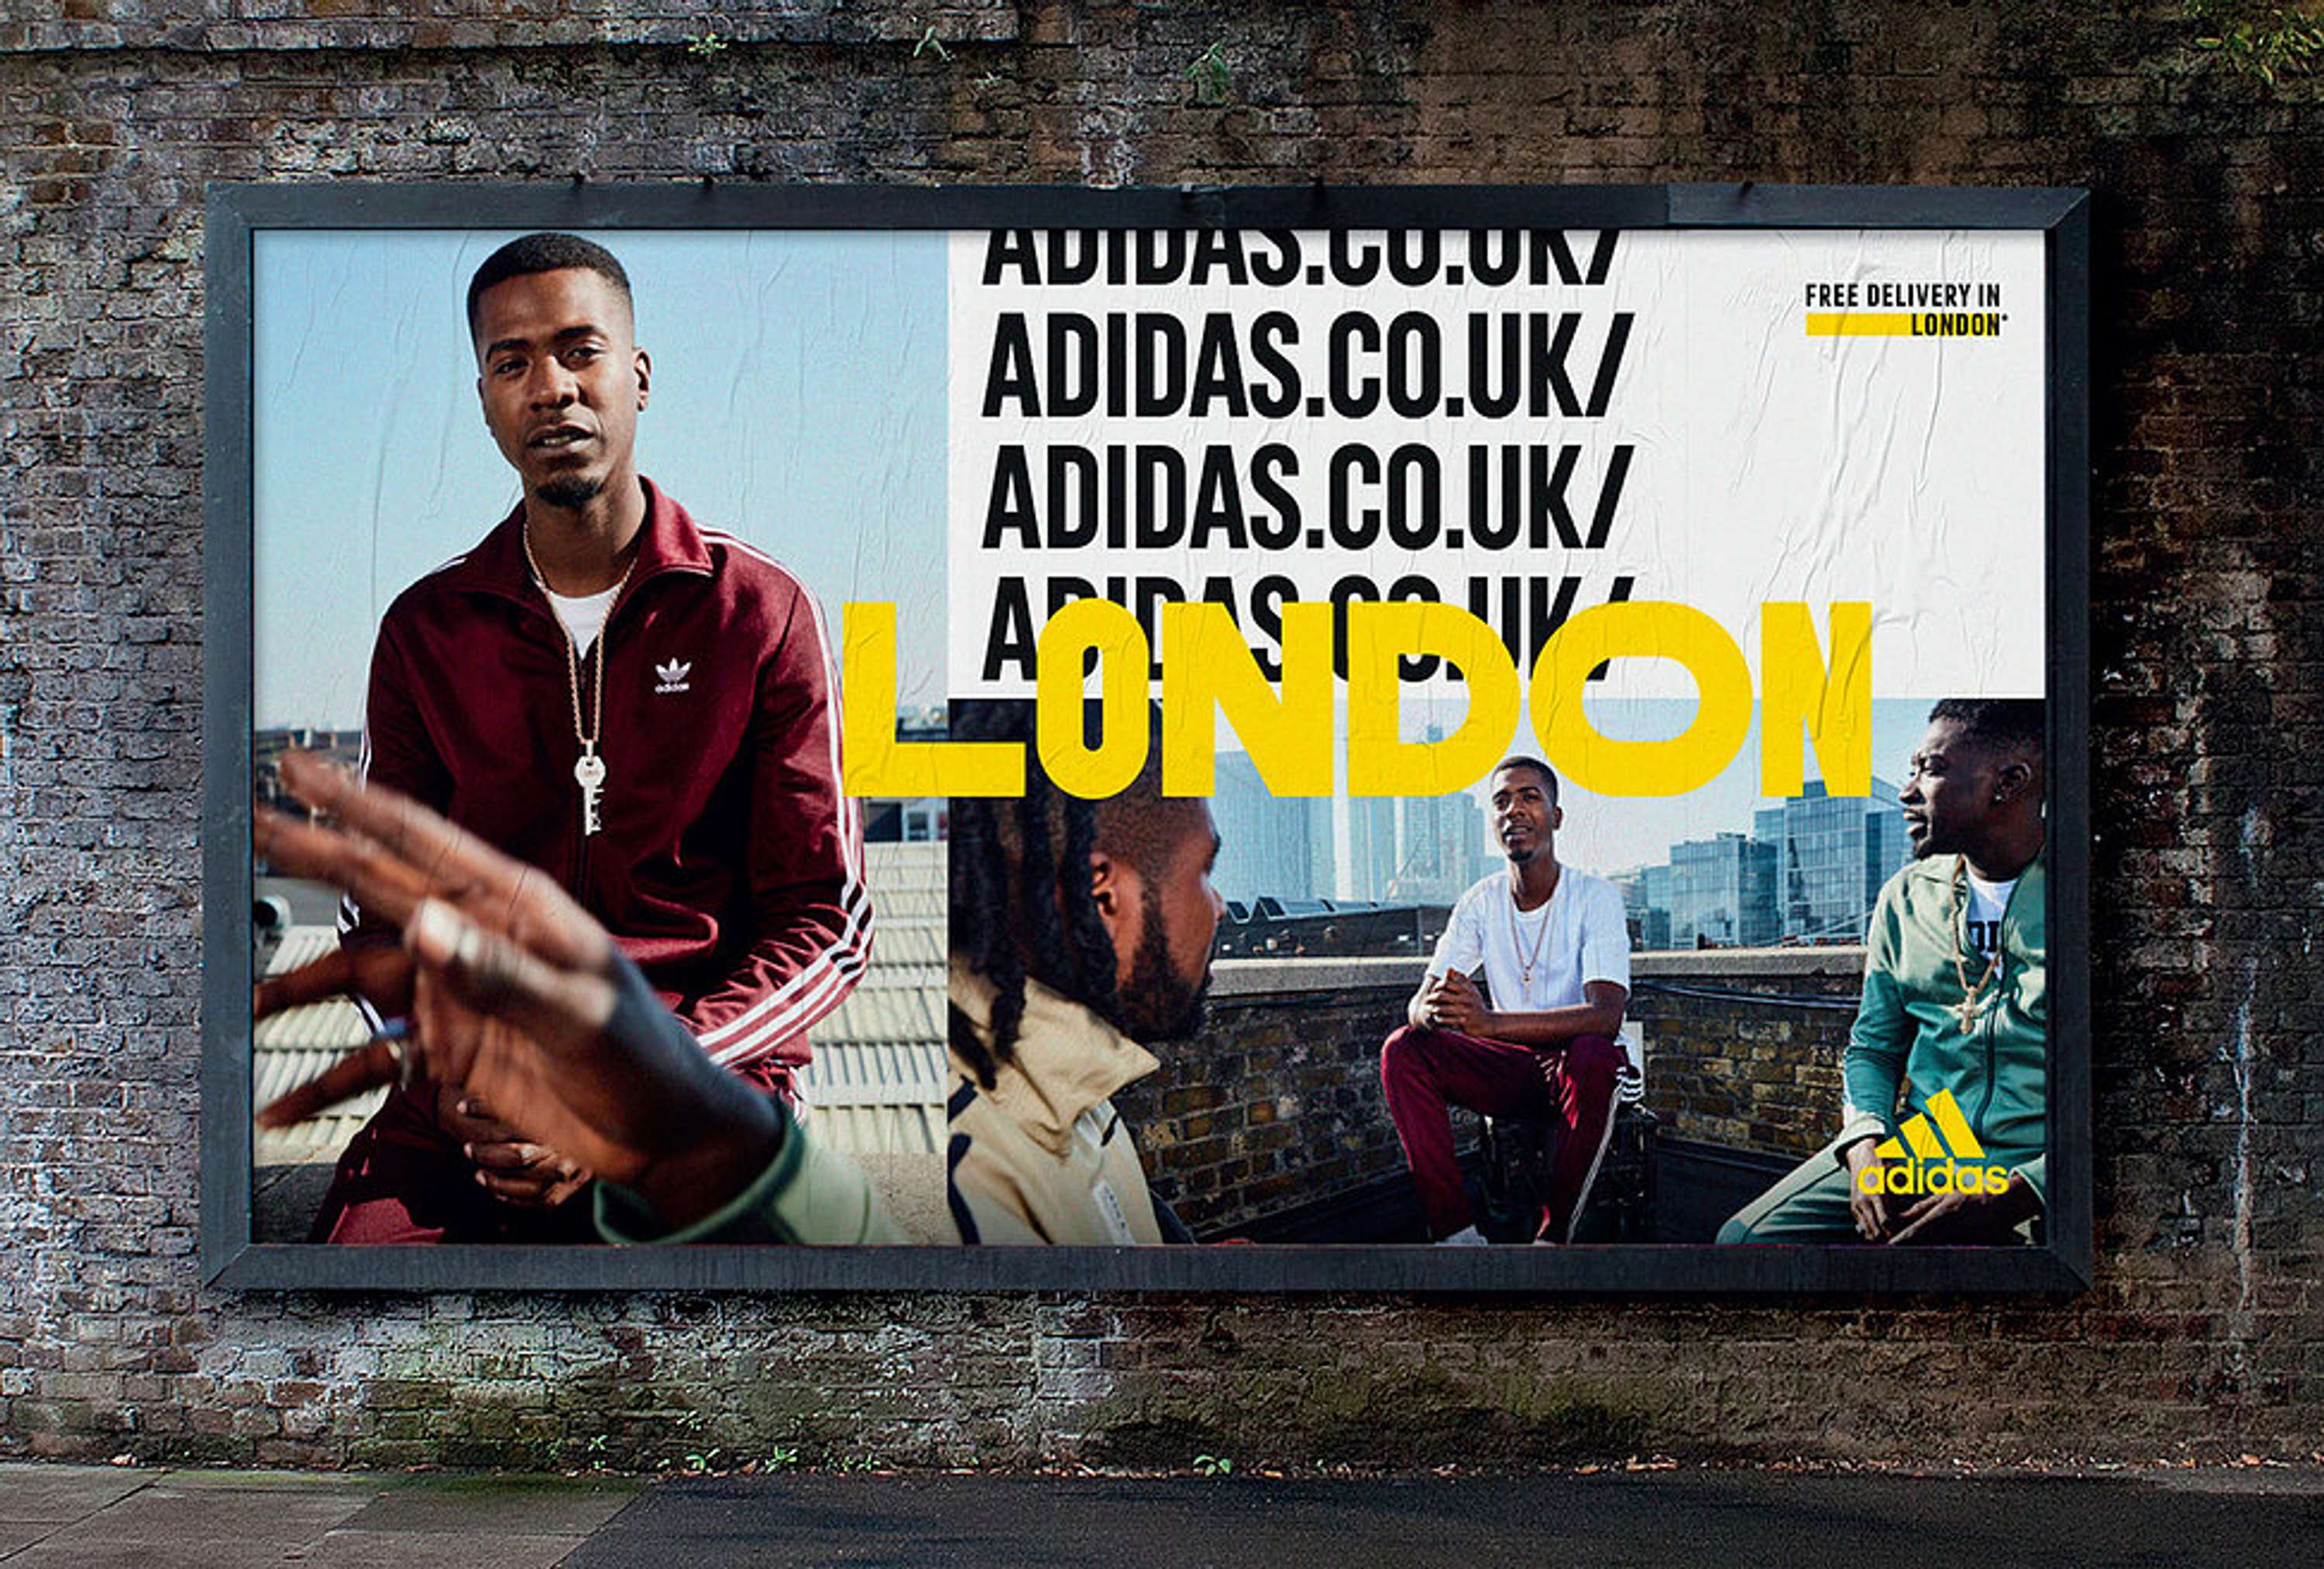 Adidas.co.uk online and outdoor London campaign | The Dots